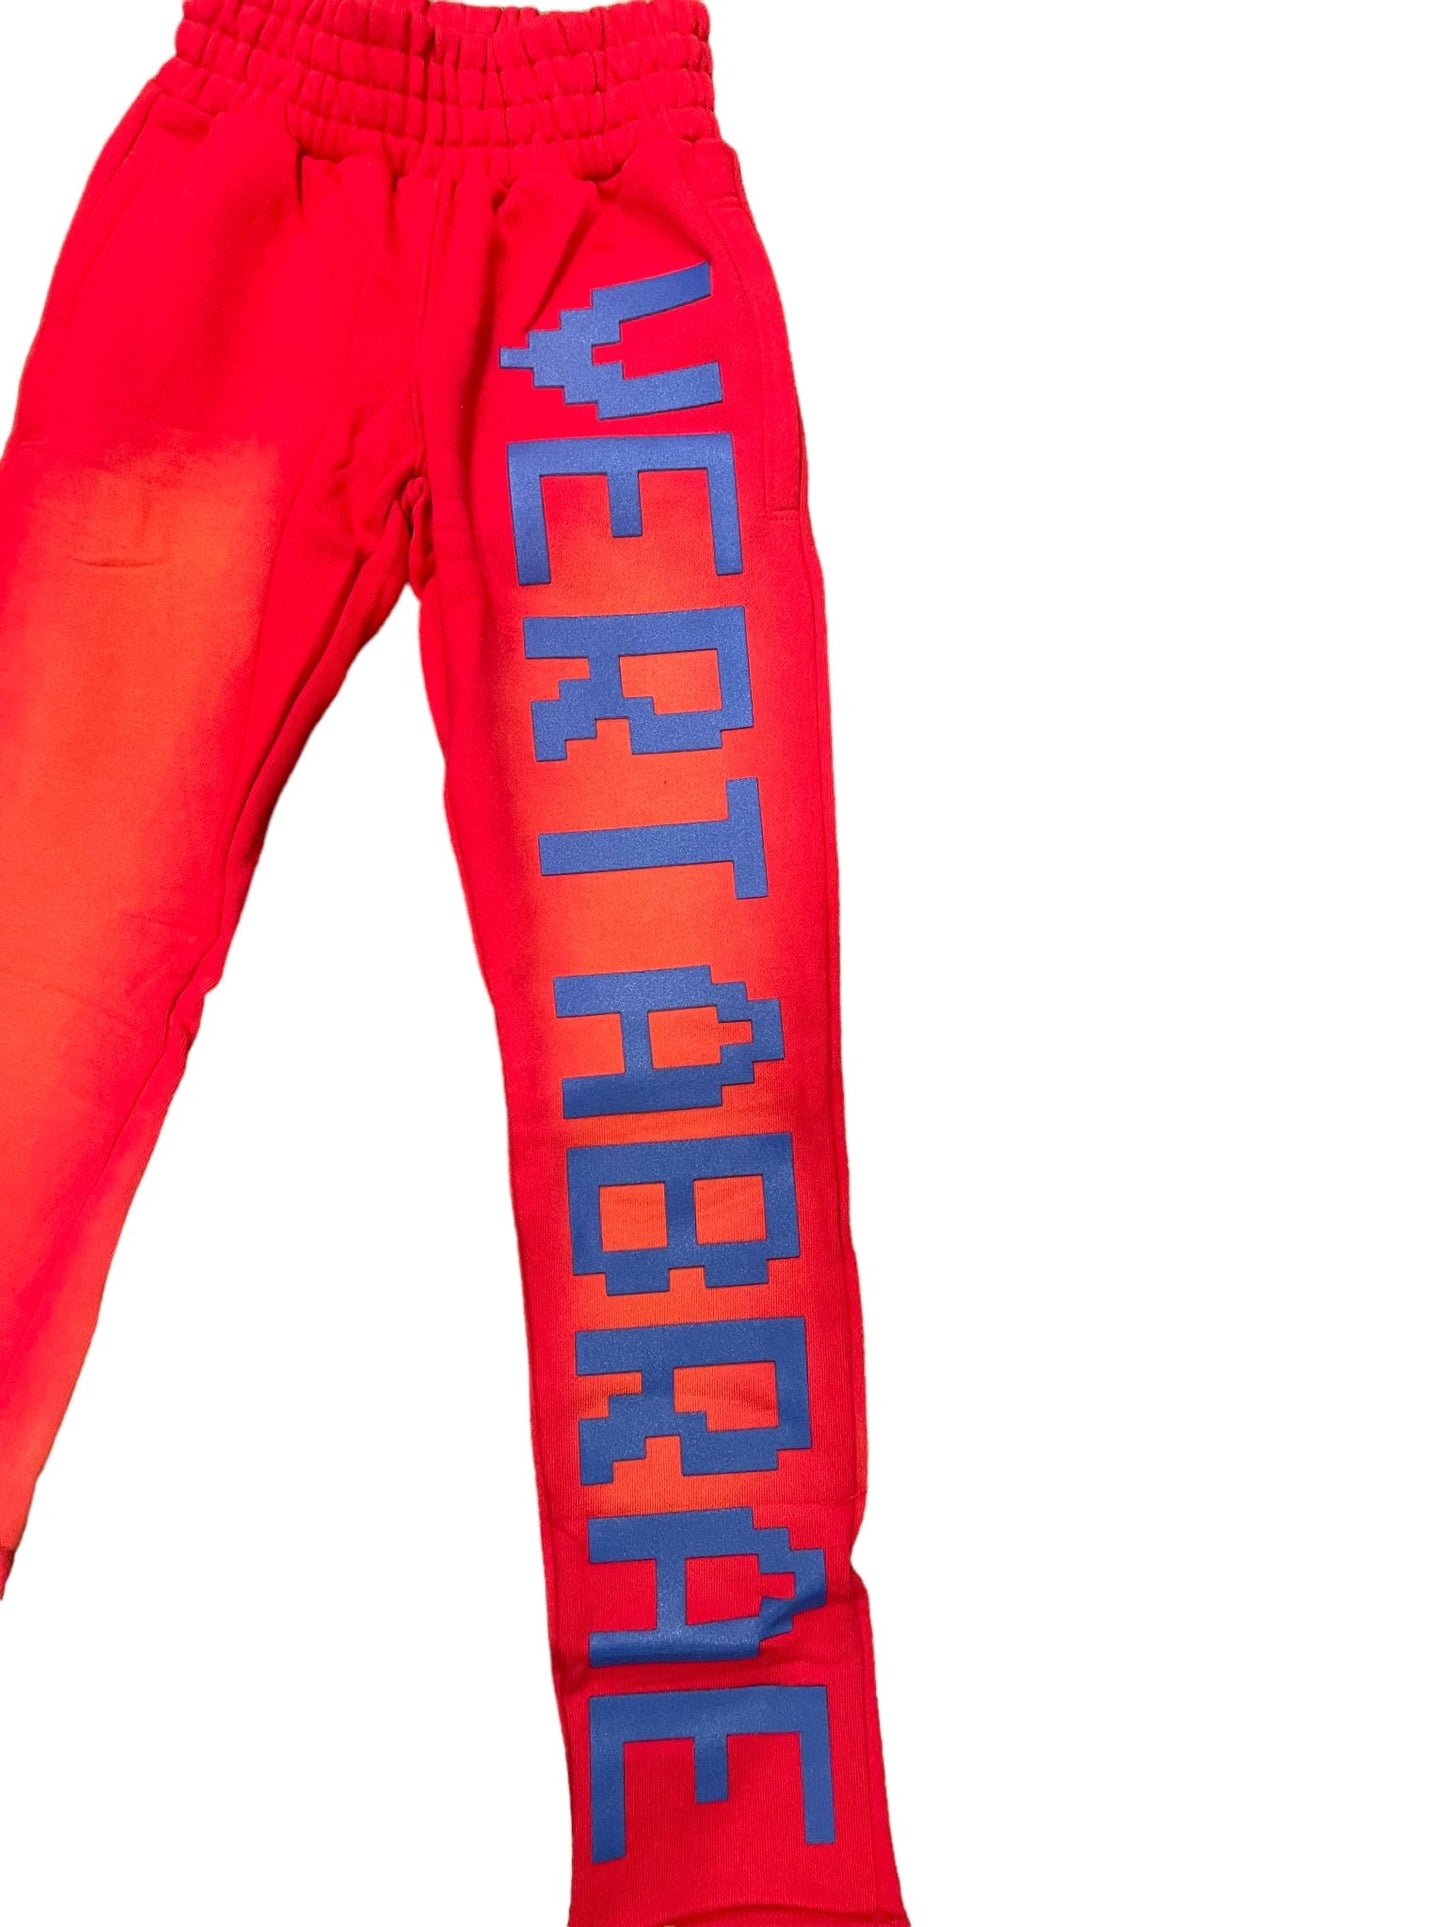 Vertabrae C-2 Sweat Pants Washed (Red & Blue) - Supra boot Sneakers